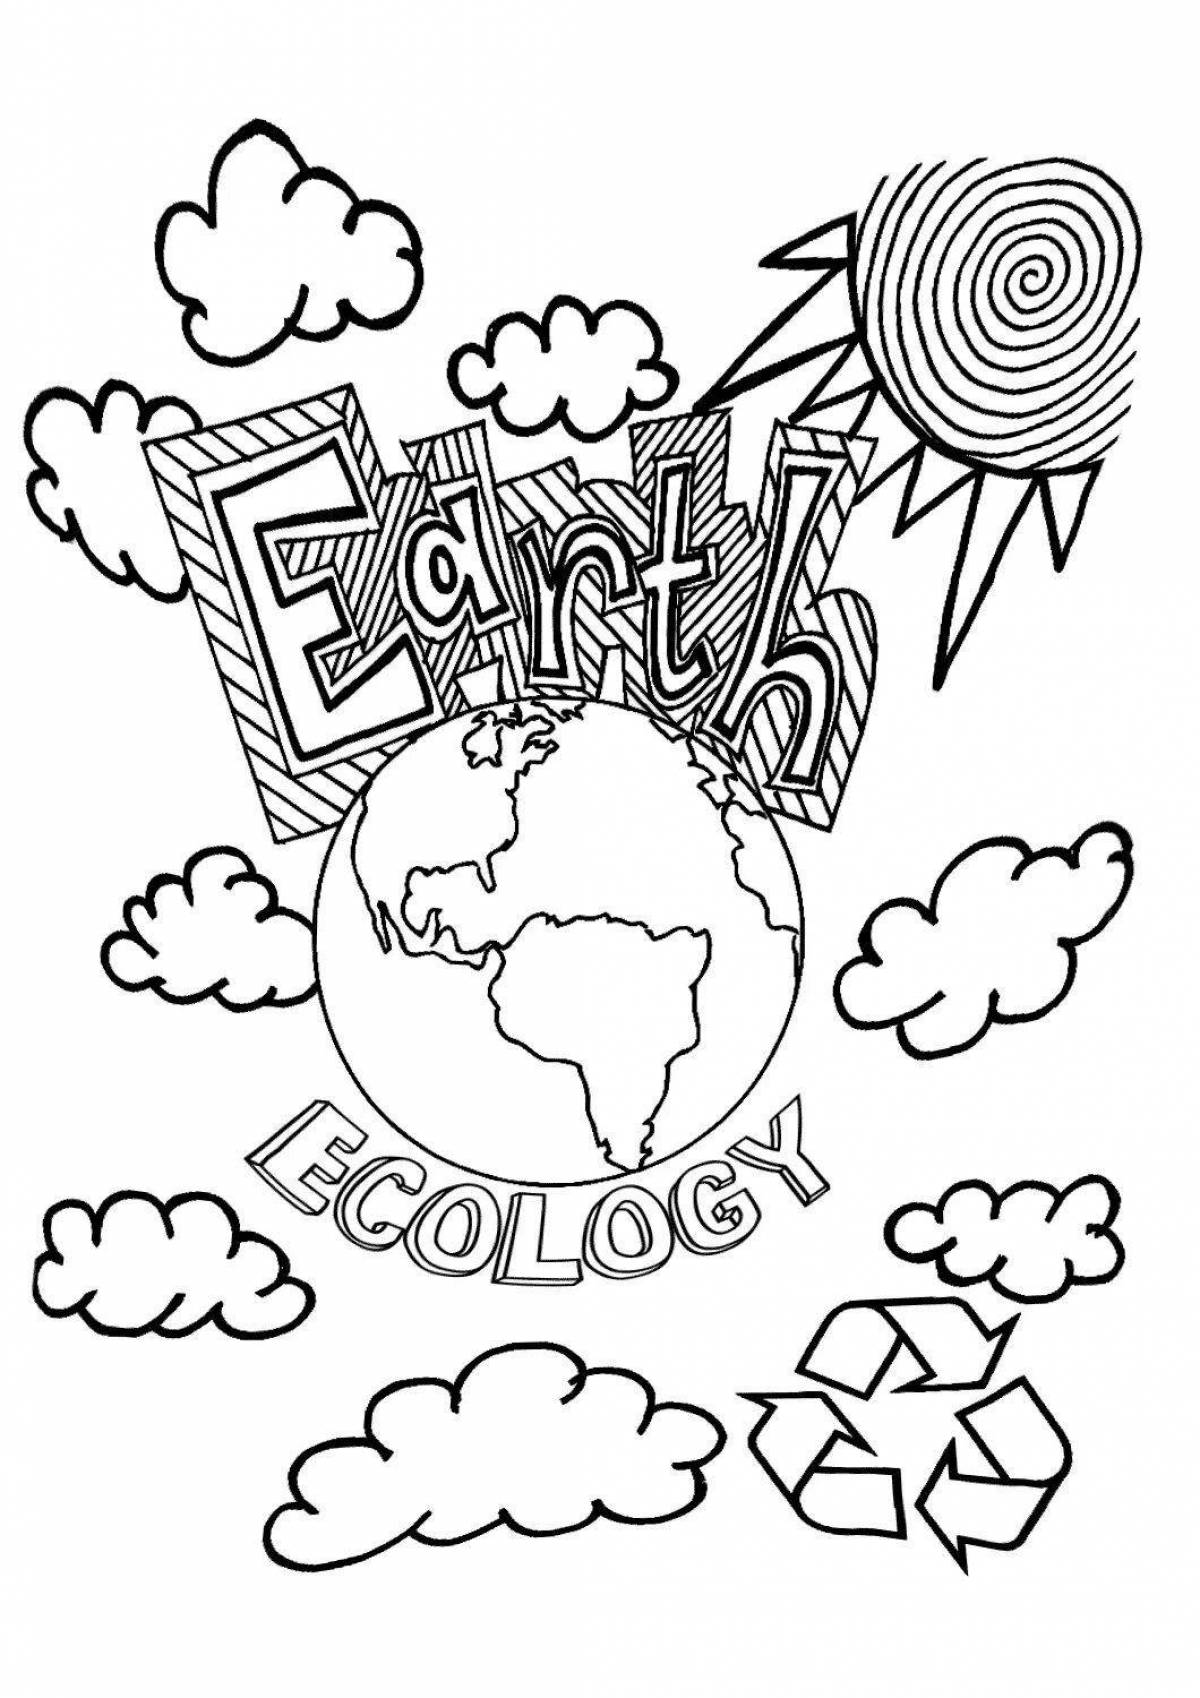 Shimmering environmental protection coloring page